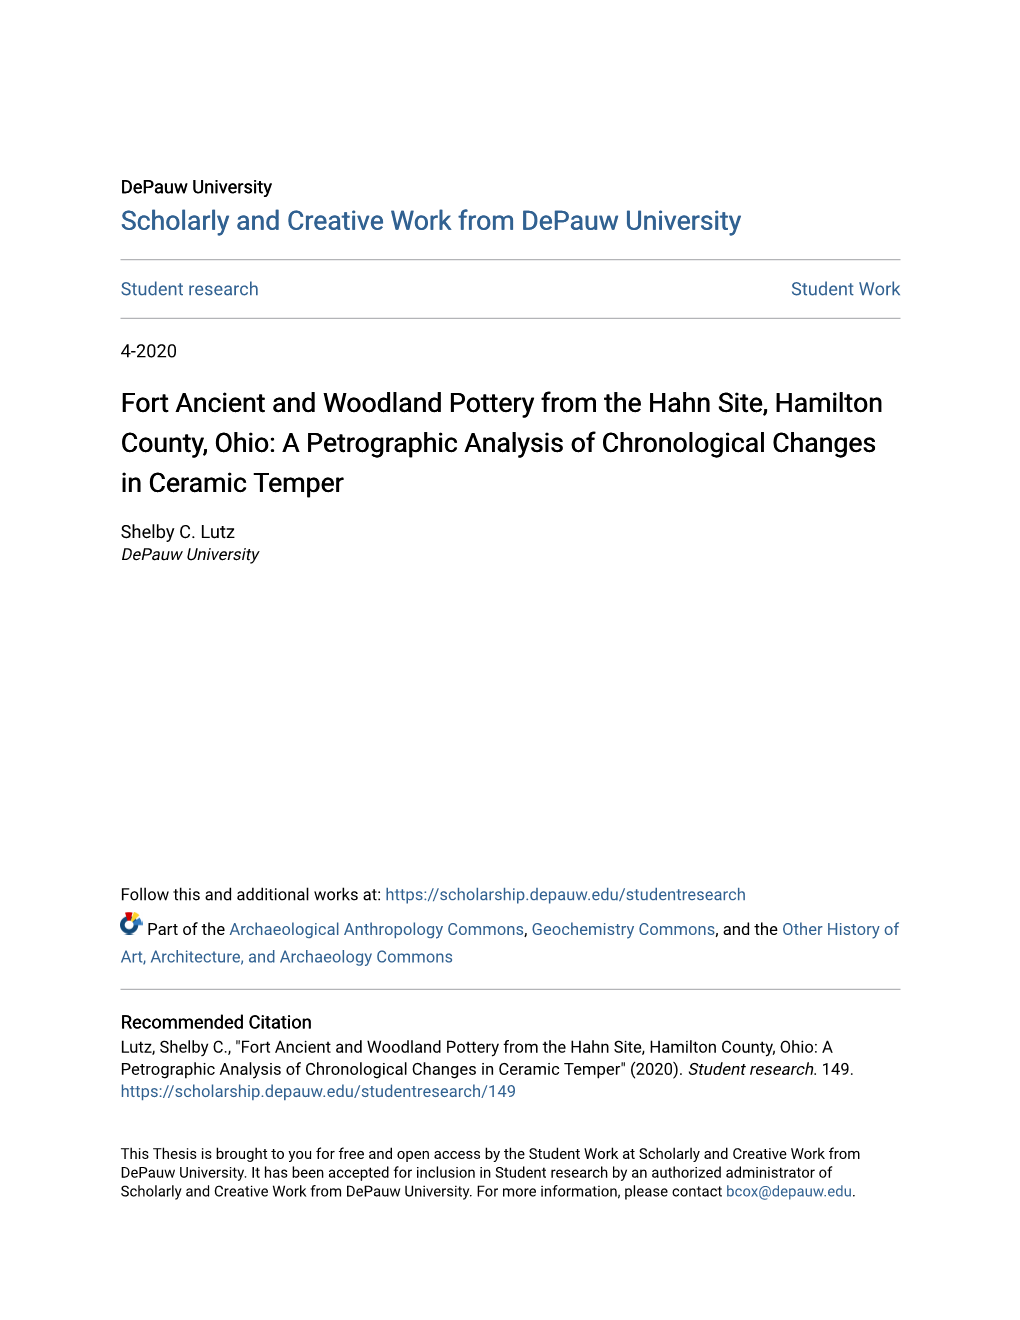 Fort Ancient and Woodland Pottery from the Hahn Site, Hamilton County, Ohio: a Petrographic Analysis of Chronological Changes in Ceramic Temper